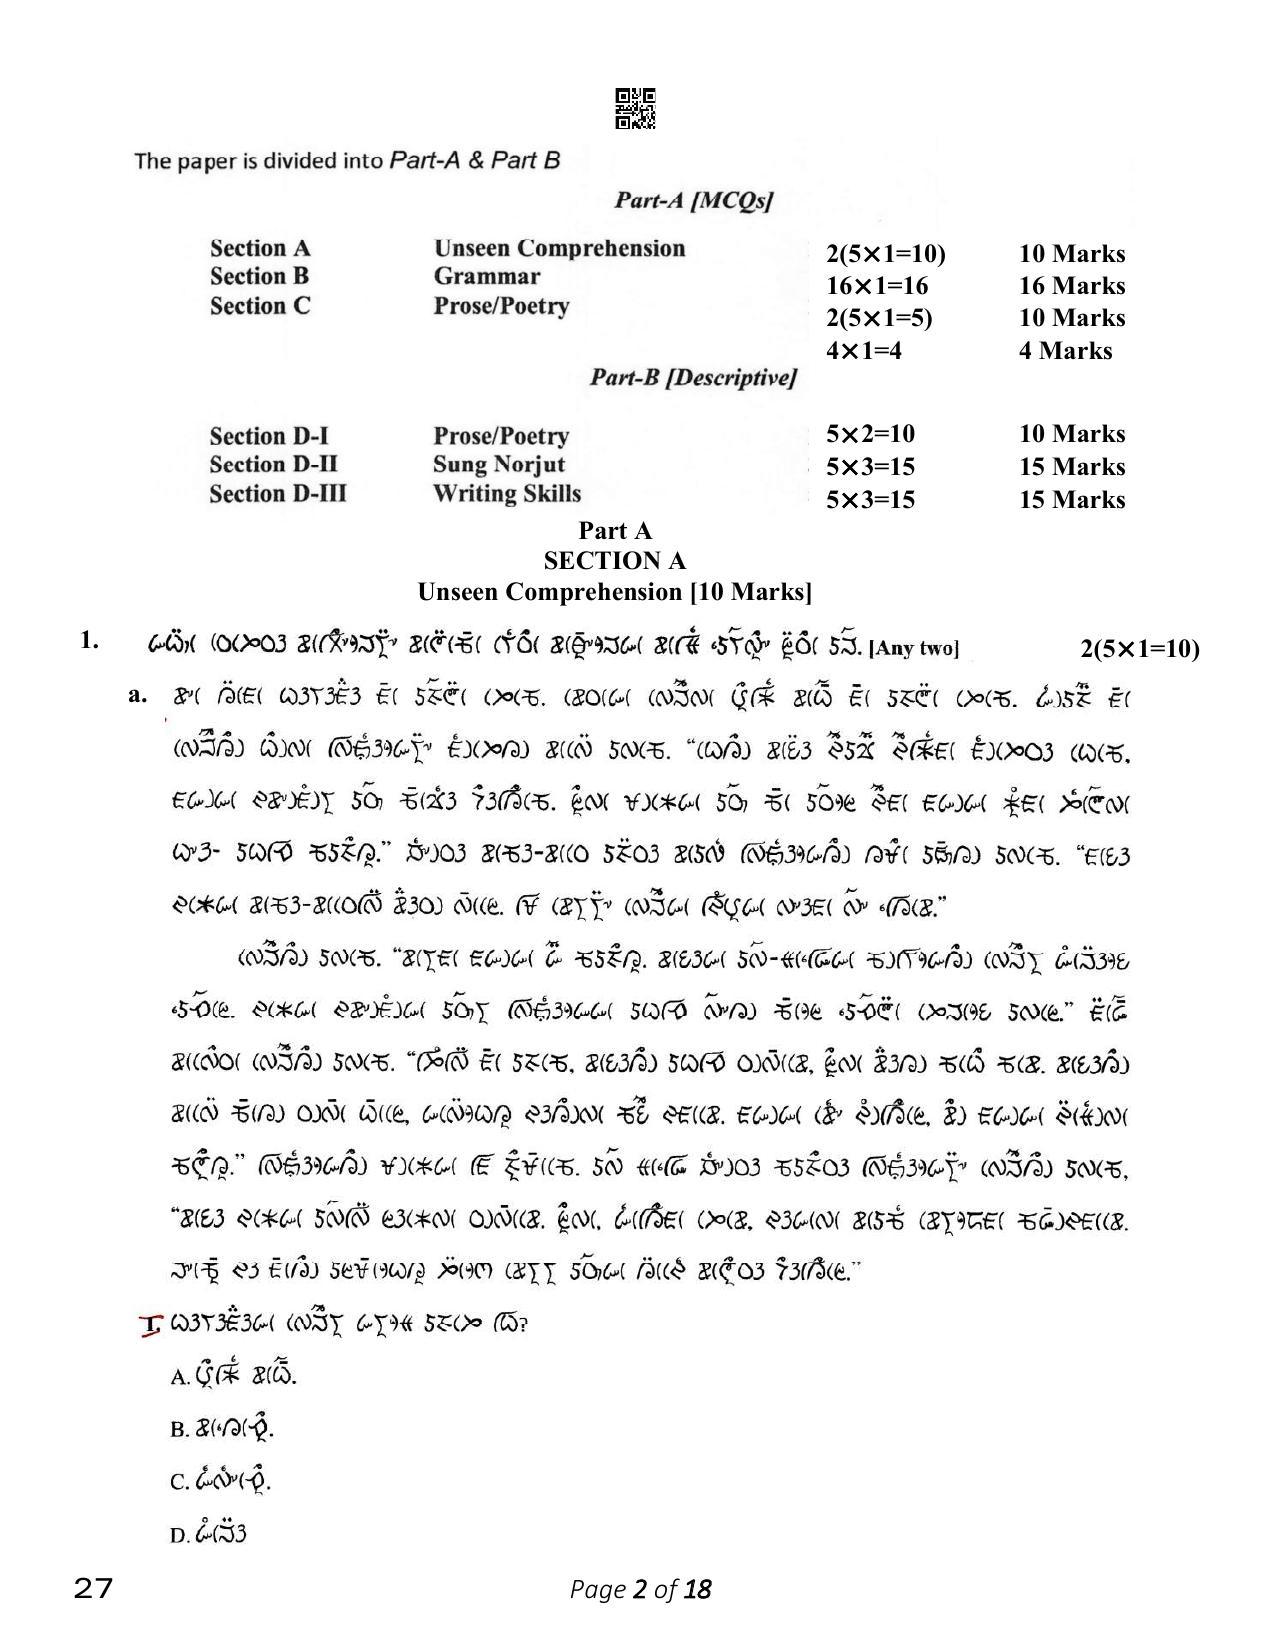 CBSE Class 10 27_Lepcha 2023 Question Paper - Page 2